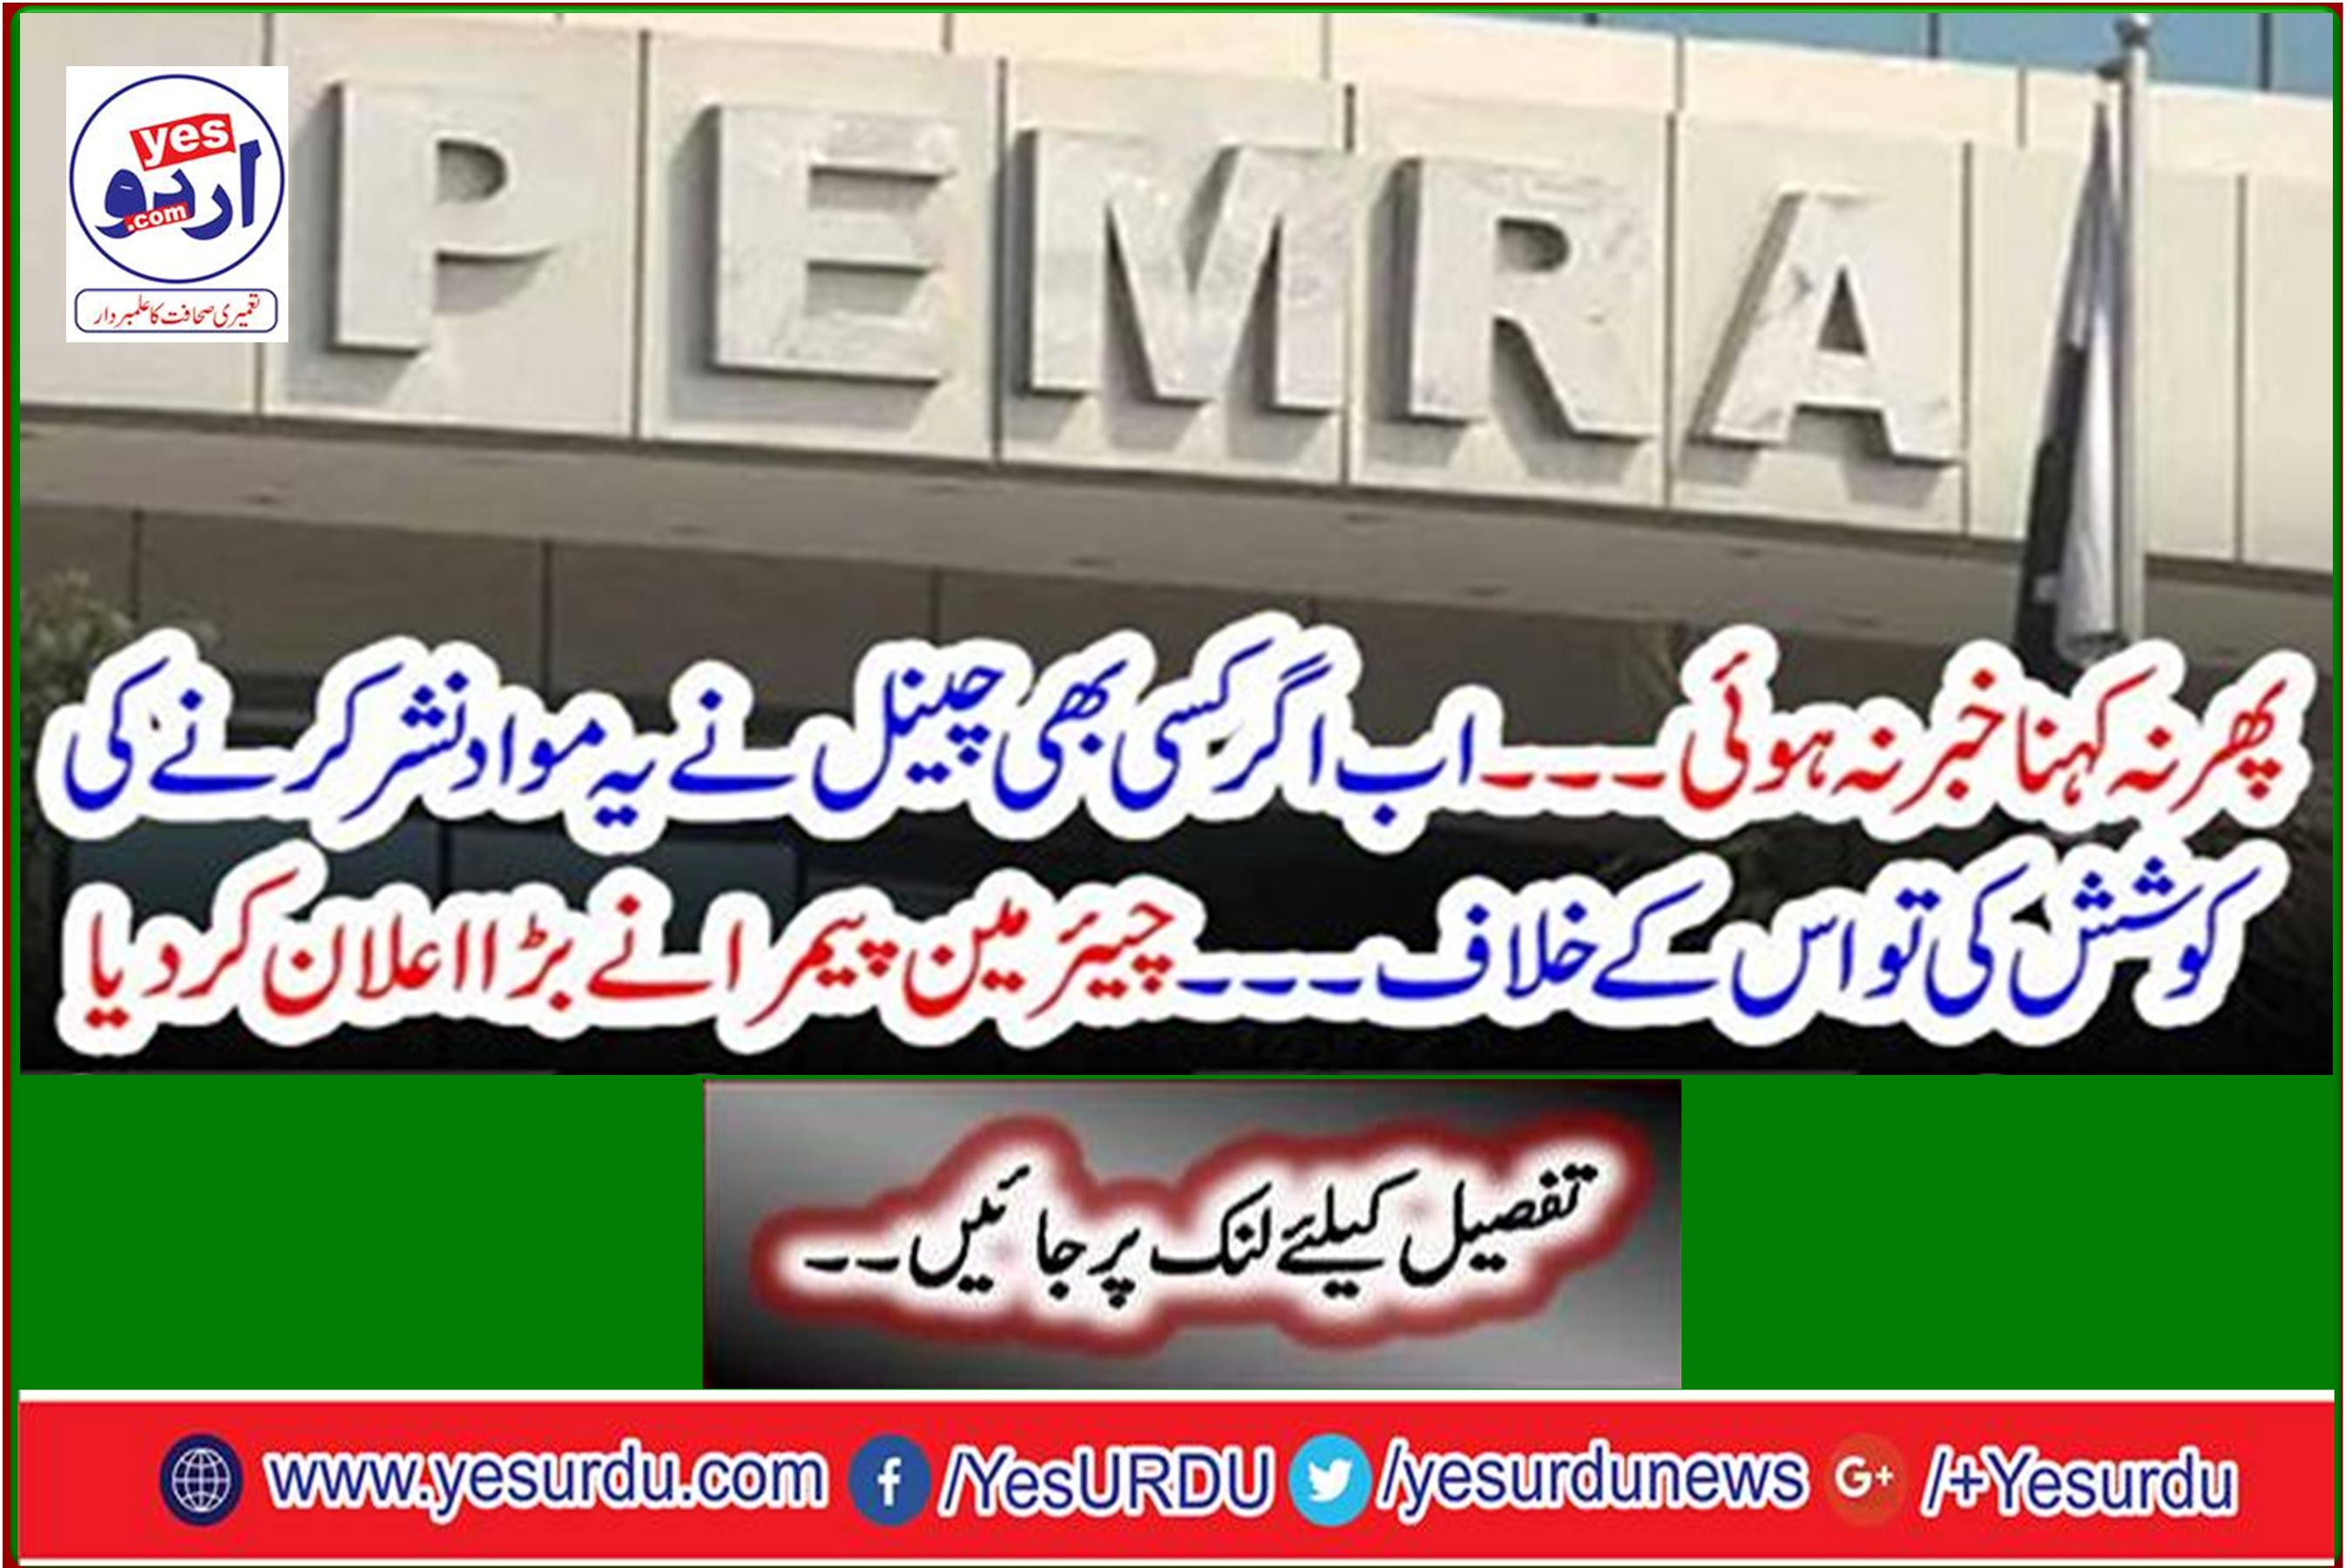 Then no news to say - now if any channel tried to broadcast this content against it ... Chairman PEMRA made a big announcement.